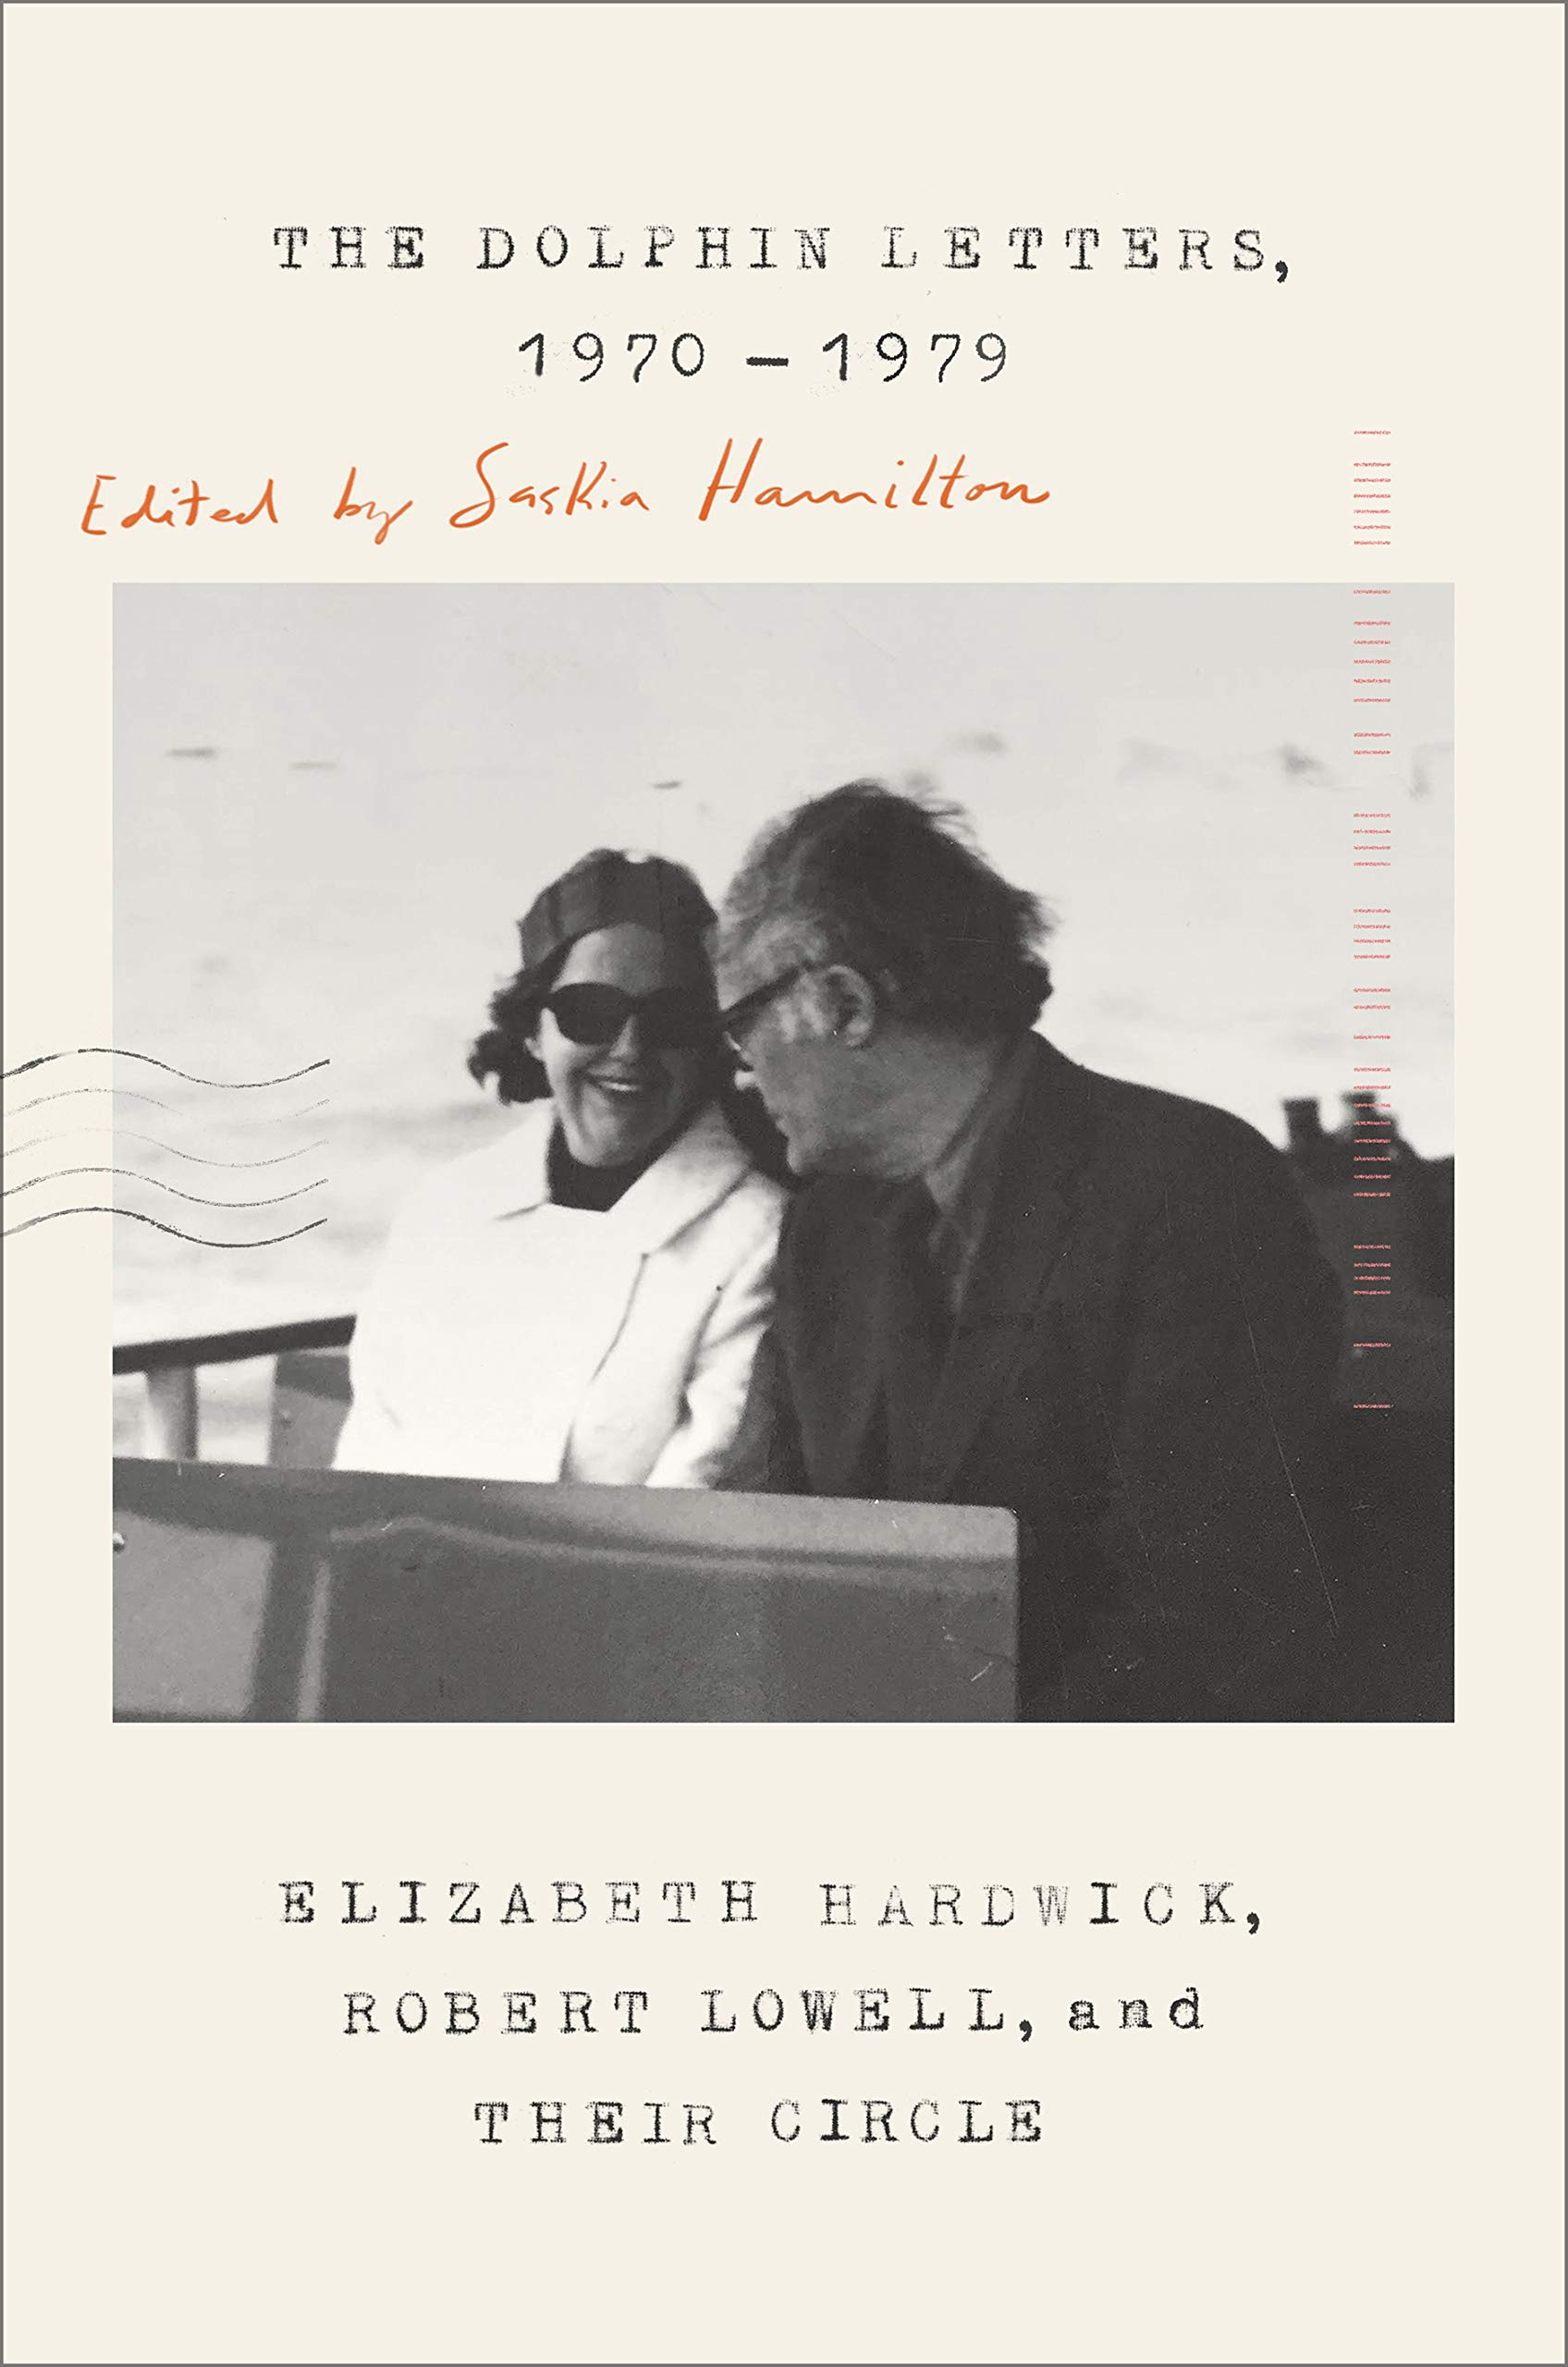 The cover of The Dolphin Letters, 1970-1979: Elizabeth Hardwick, Robert Lowell, and Their Circle